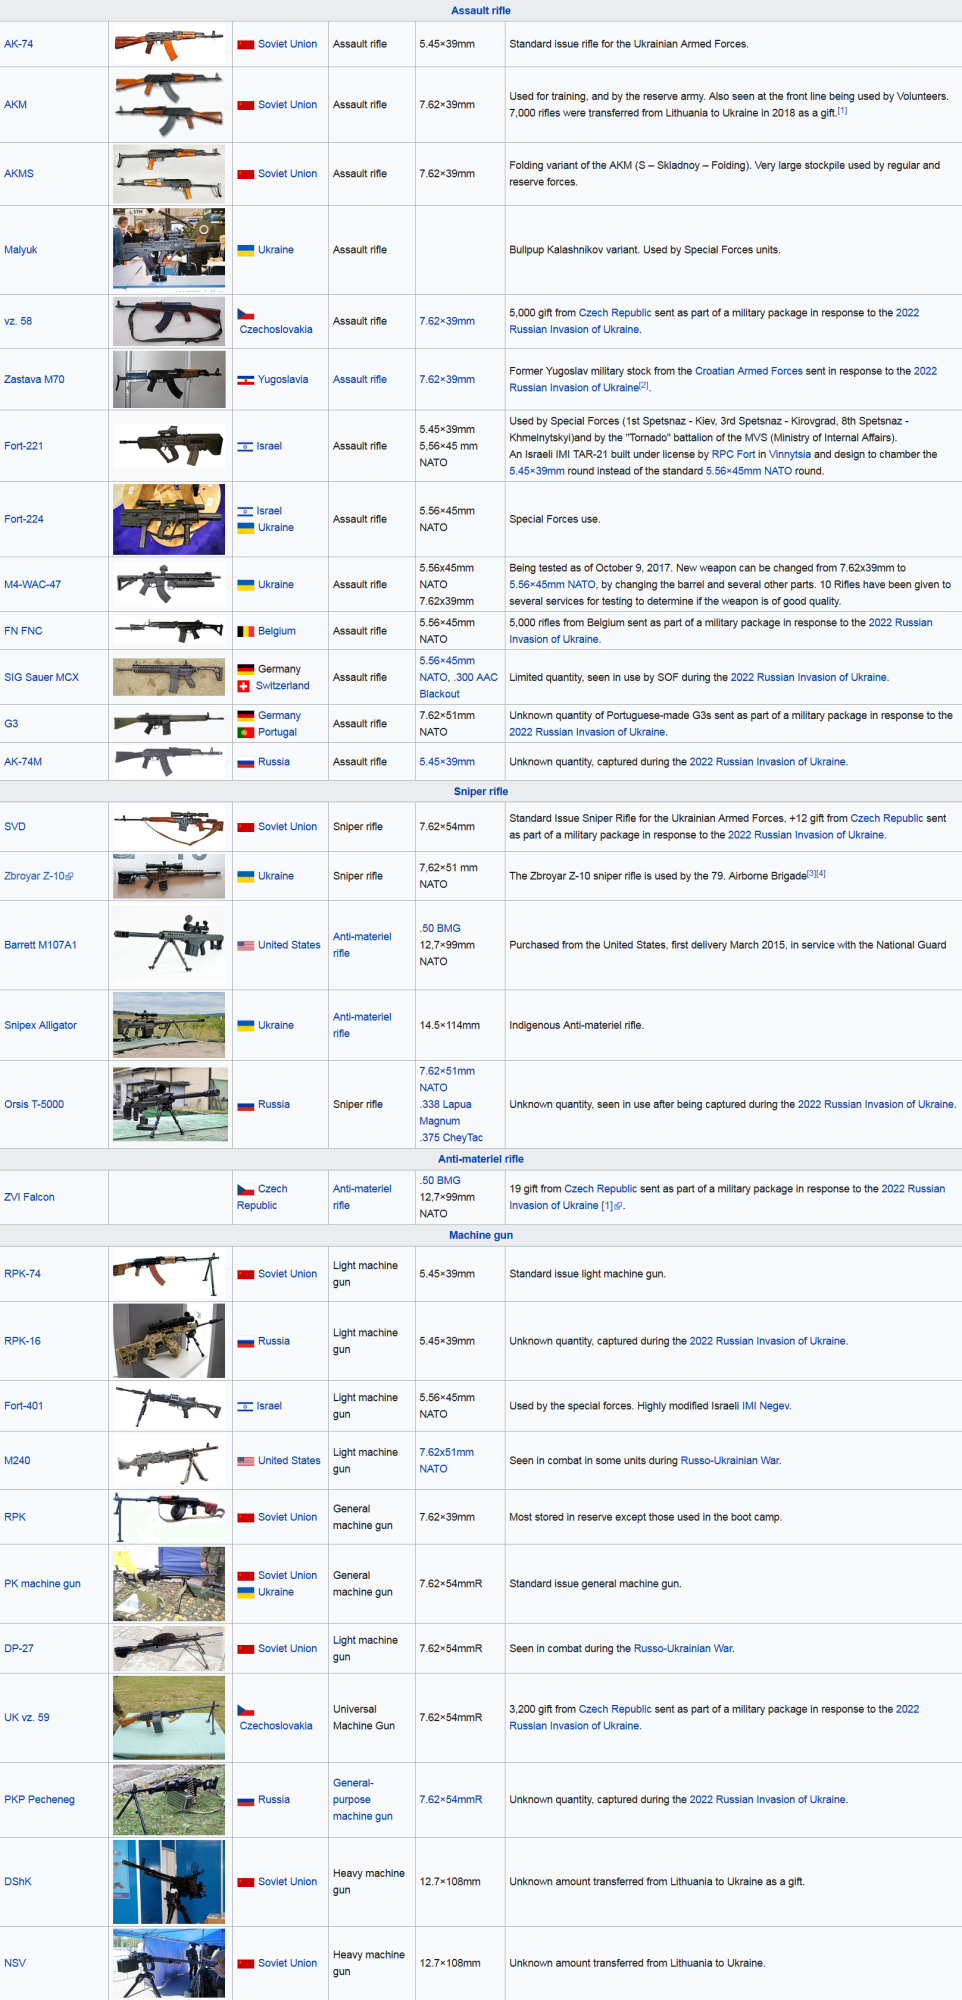 Screenshot_2022-03-15 List of equipment of the Ukrainian Ground Forces - Wikipedia.png